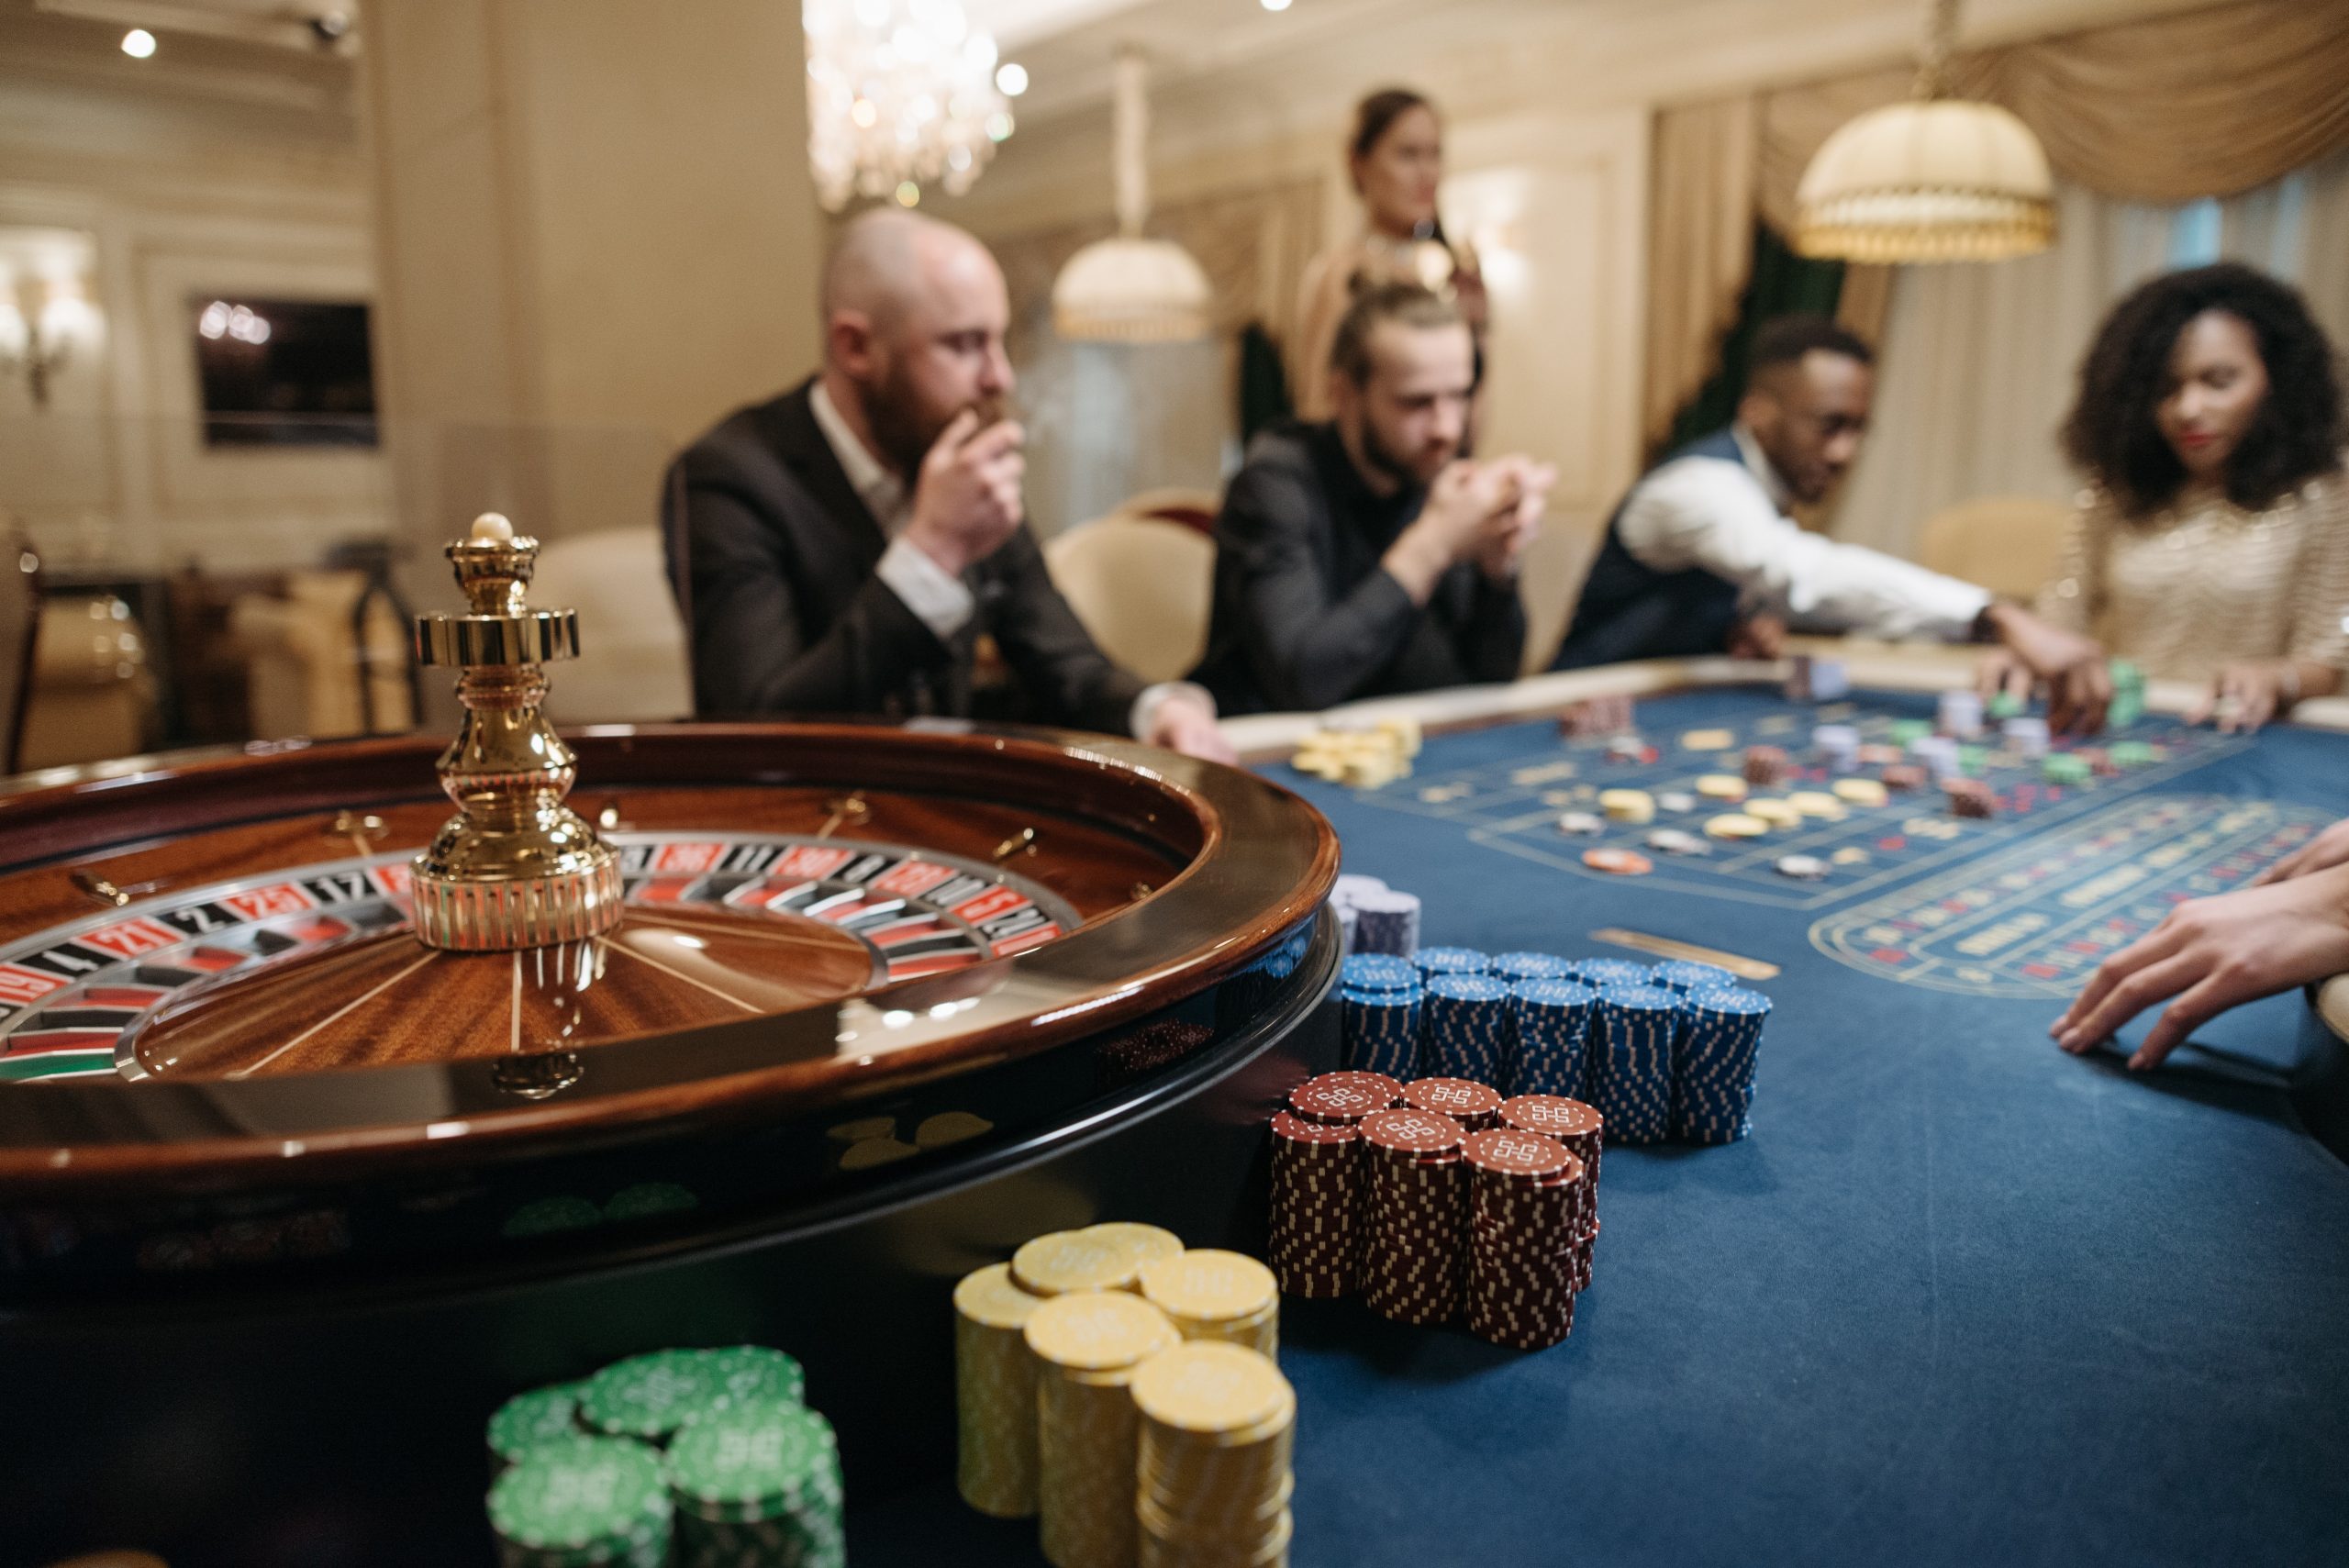 Beginner’s Casino Games That Will Get You Into The Game